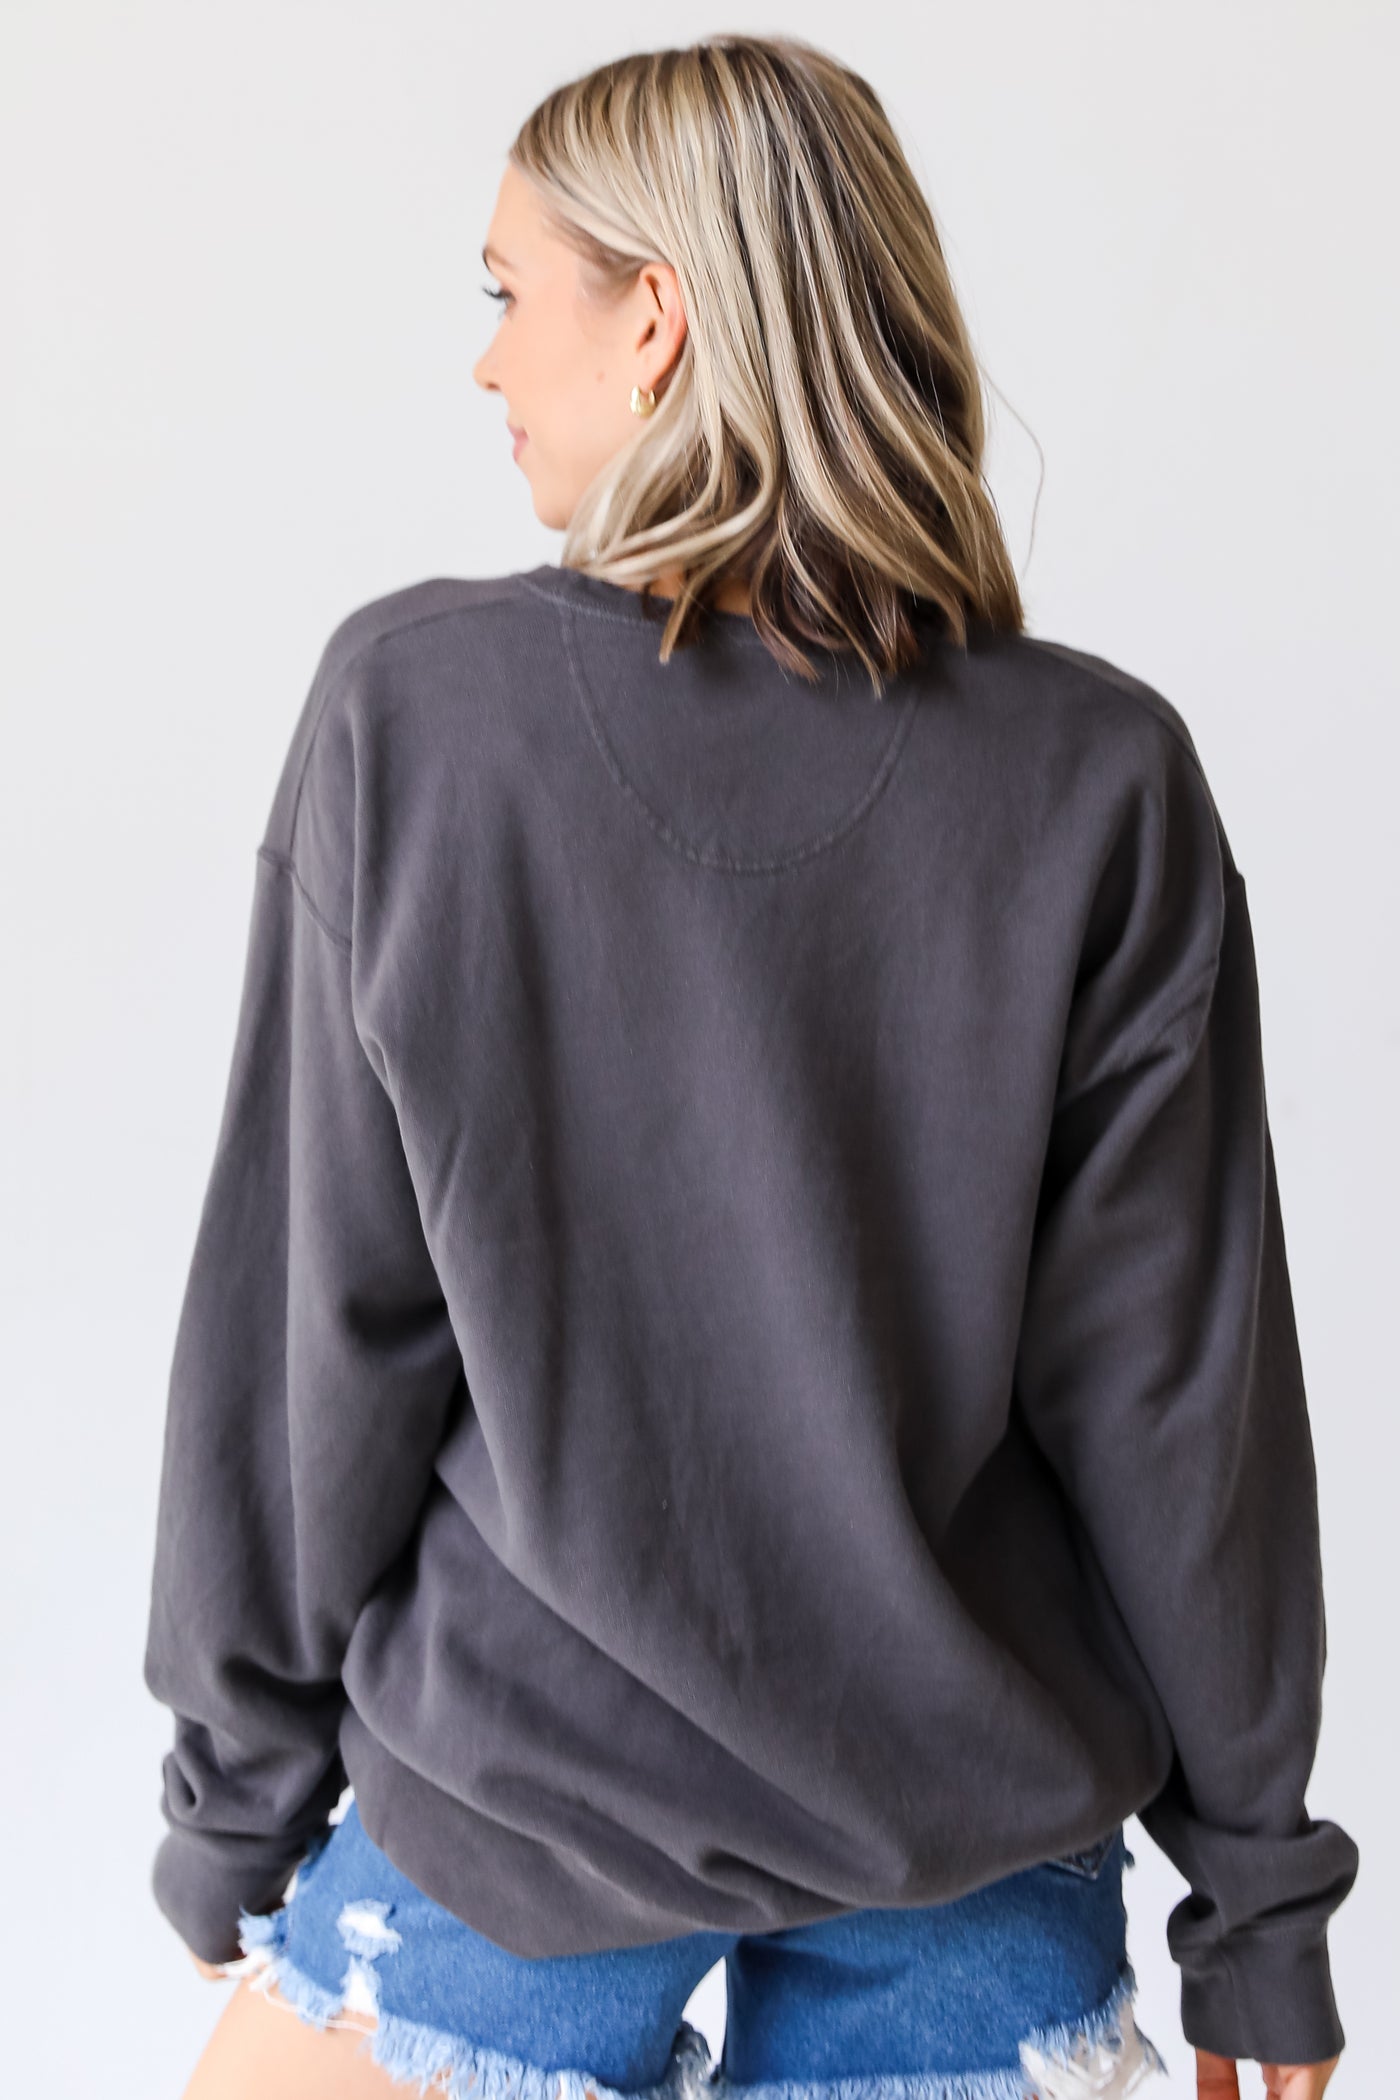 Charcoal Gainesville Georgia Pullover back view